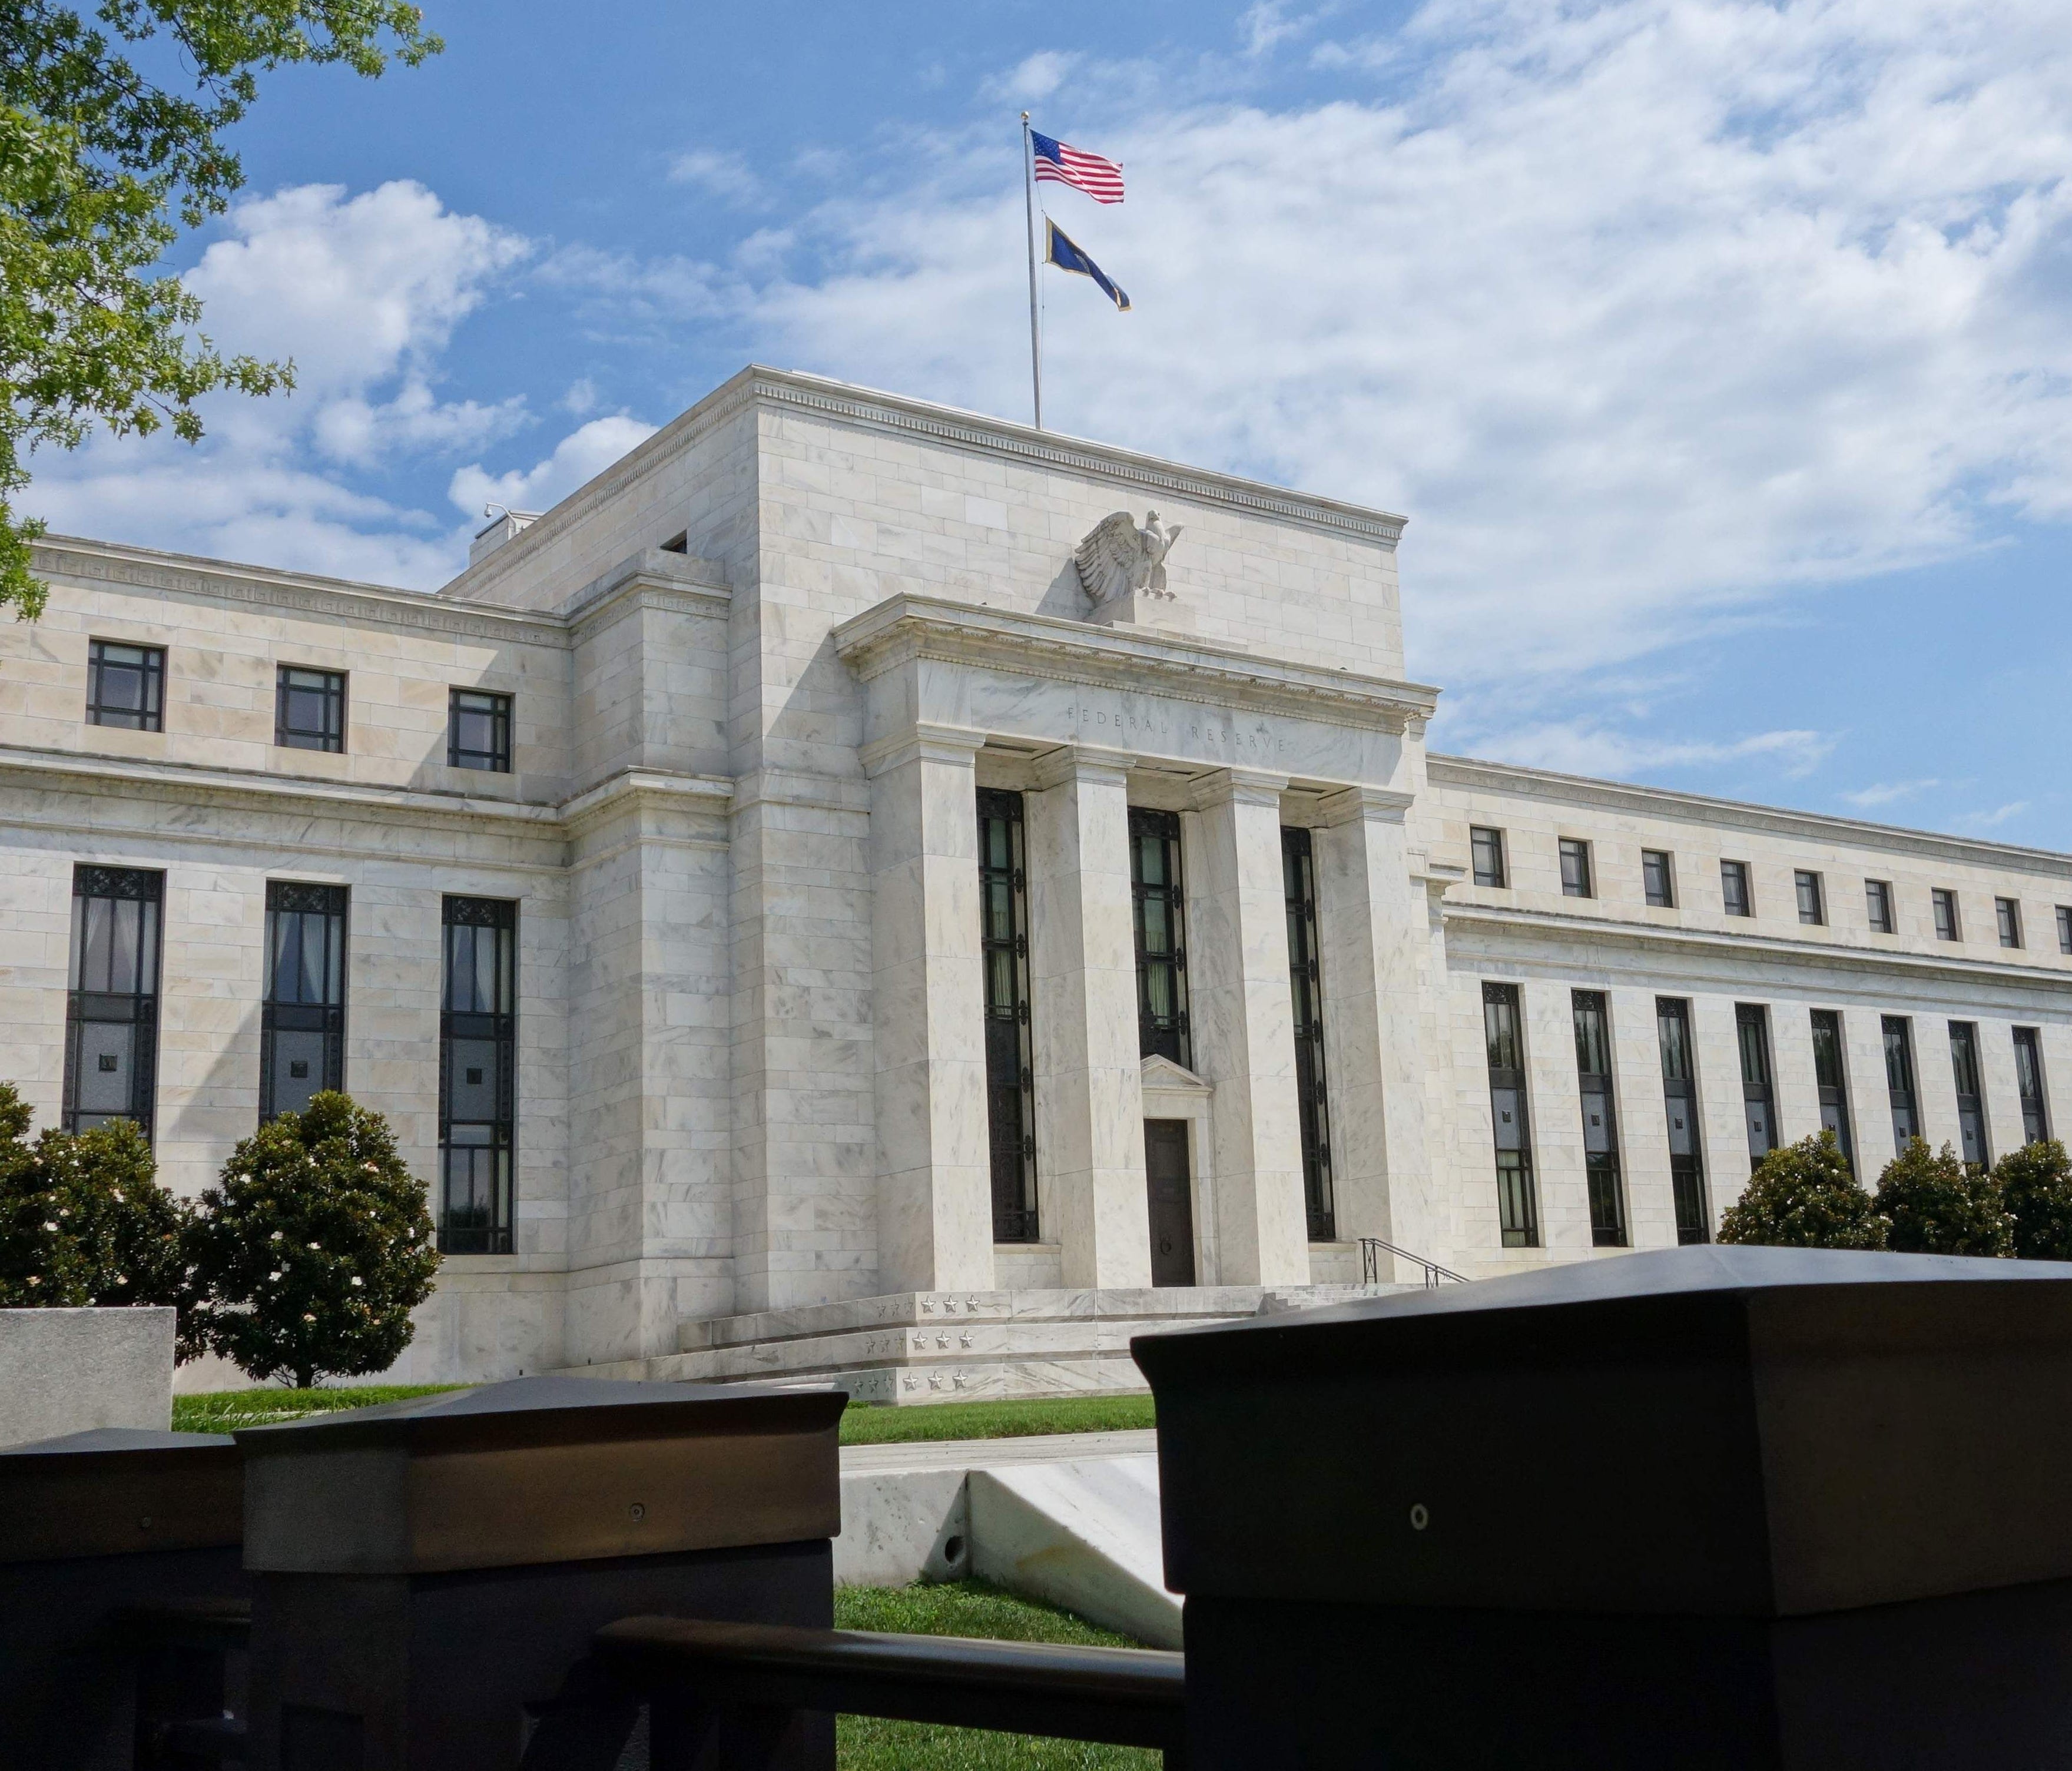 The U.S. Federal Reserve building  in Washington, DC.